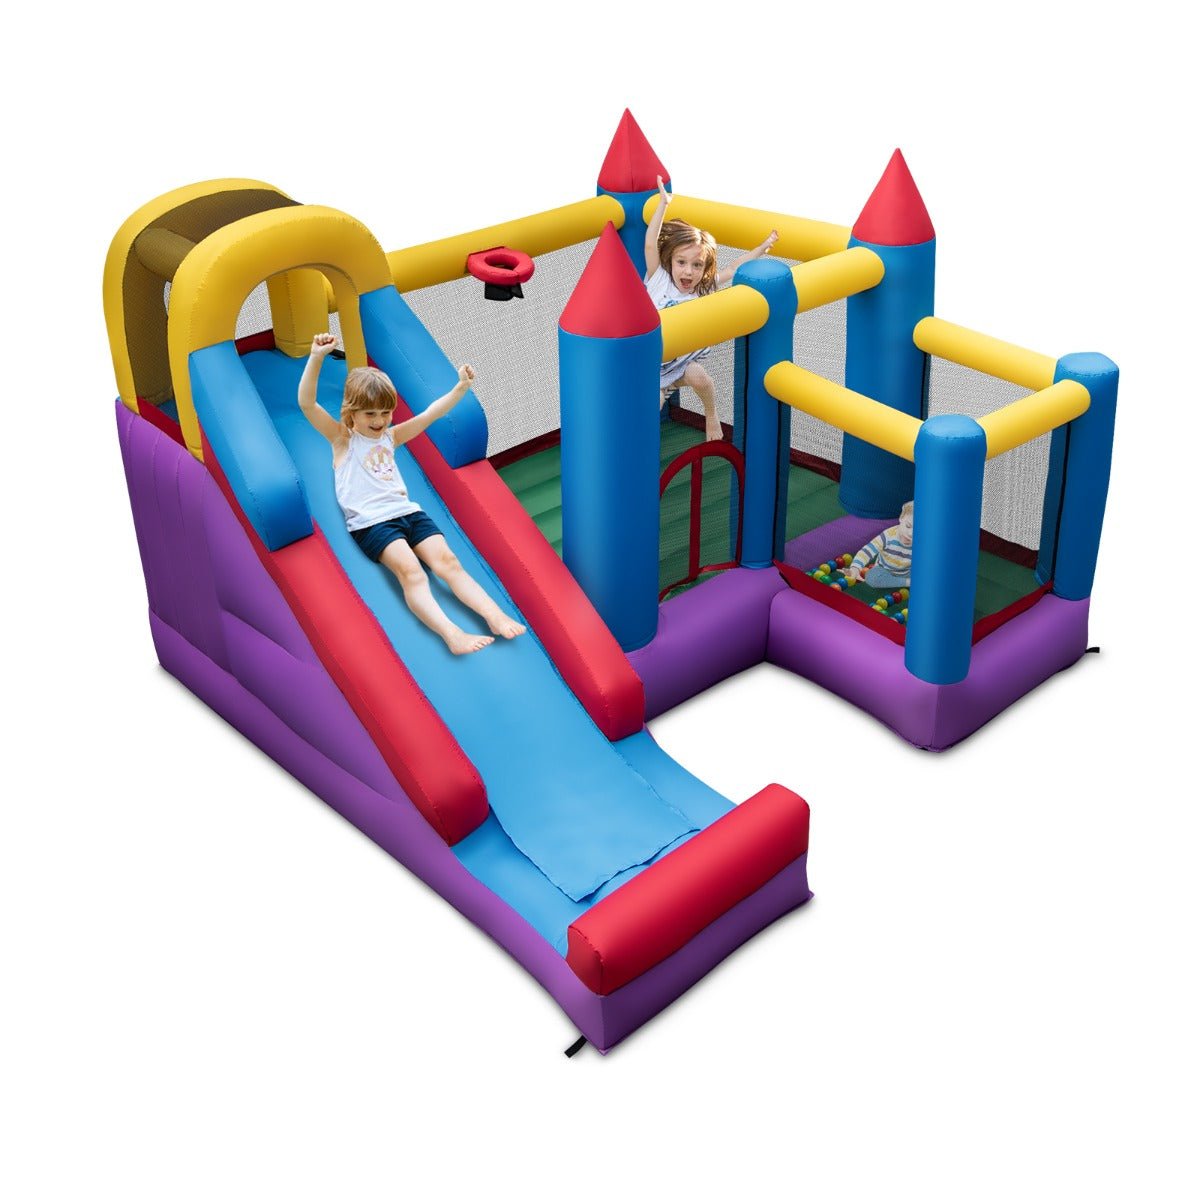 All-in-One Inflatable Play Center - Slide, Trampoline & Activities (No Air Blower)